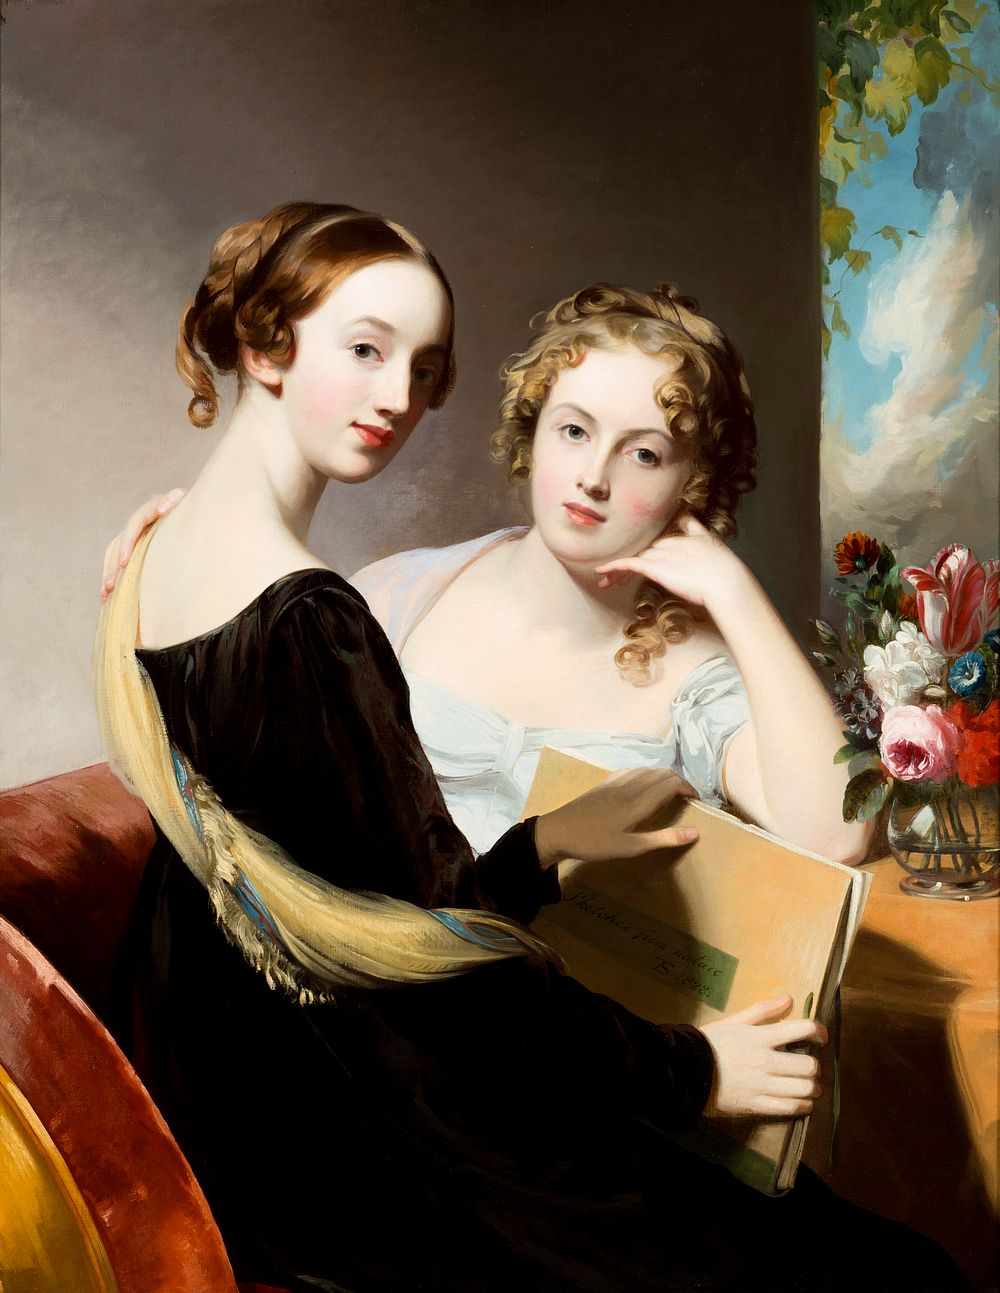 Portrait of the Misses Mary and Emily McEuen by Thomas Sully